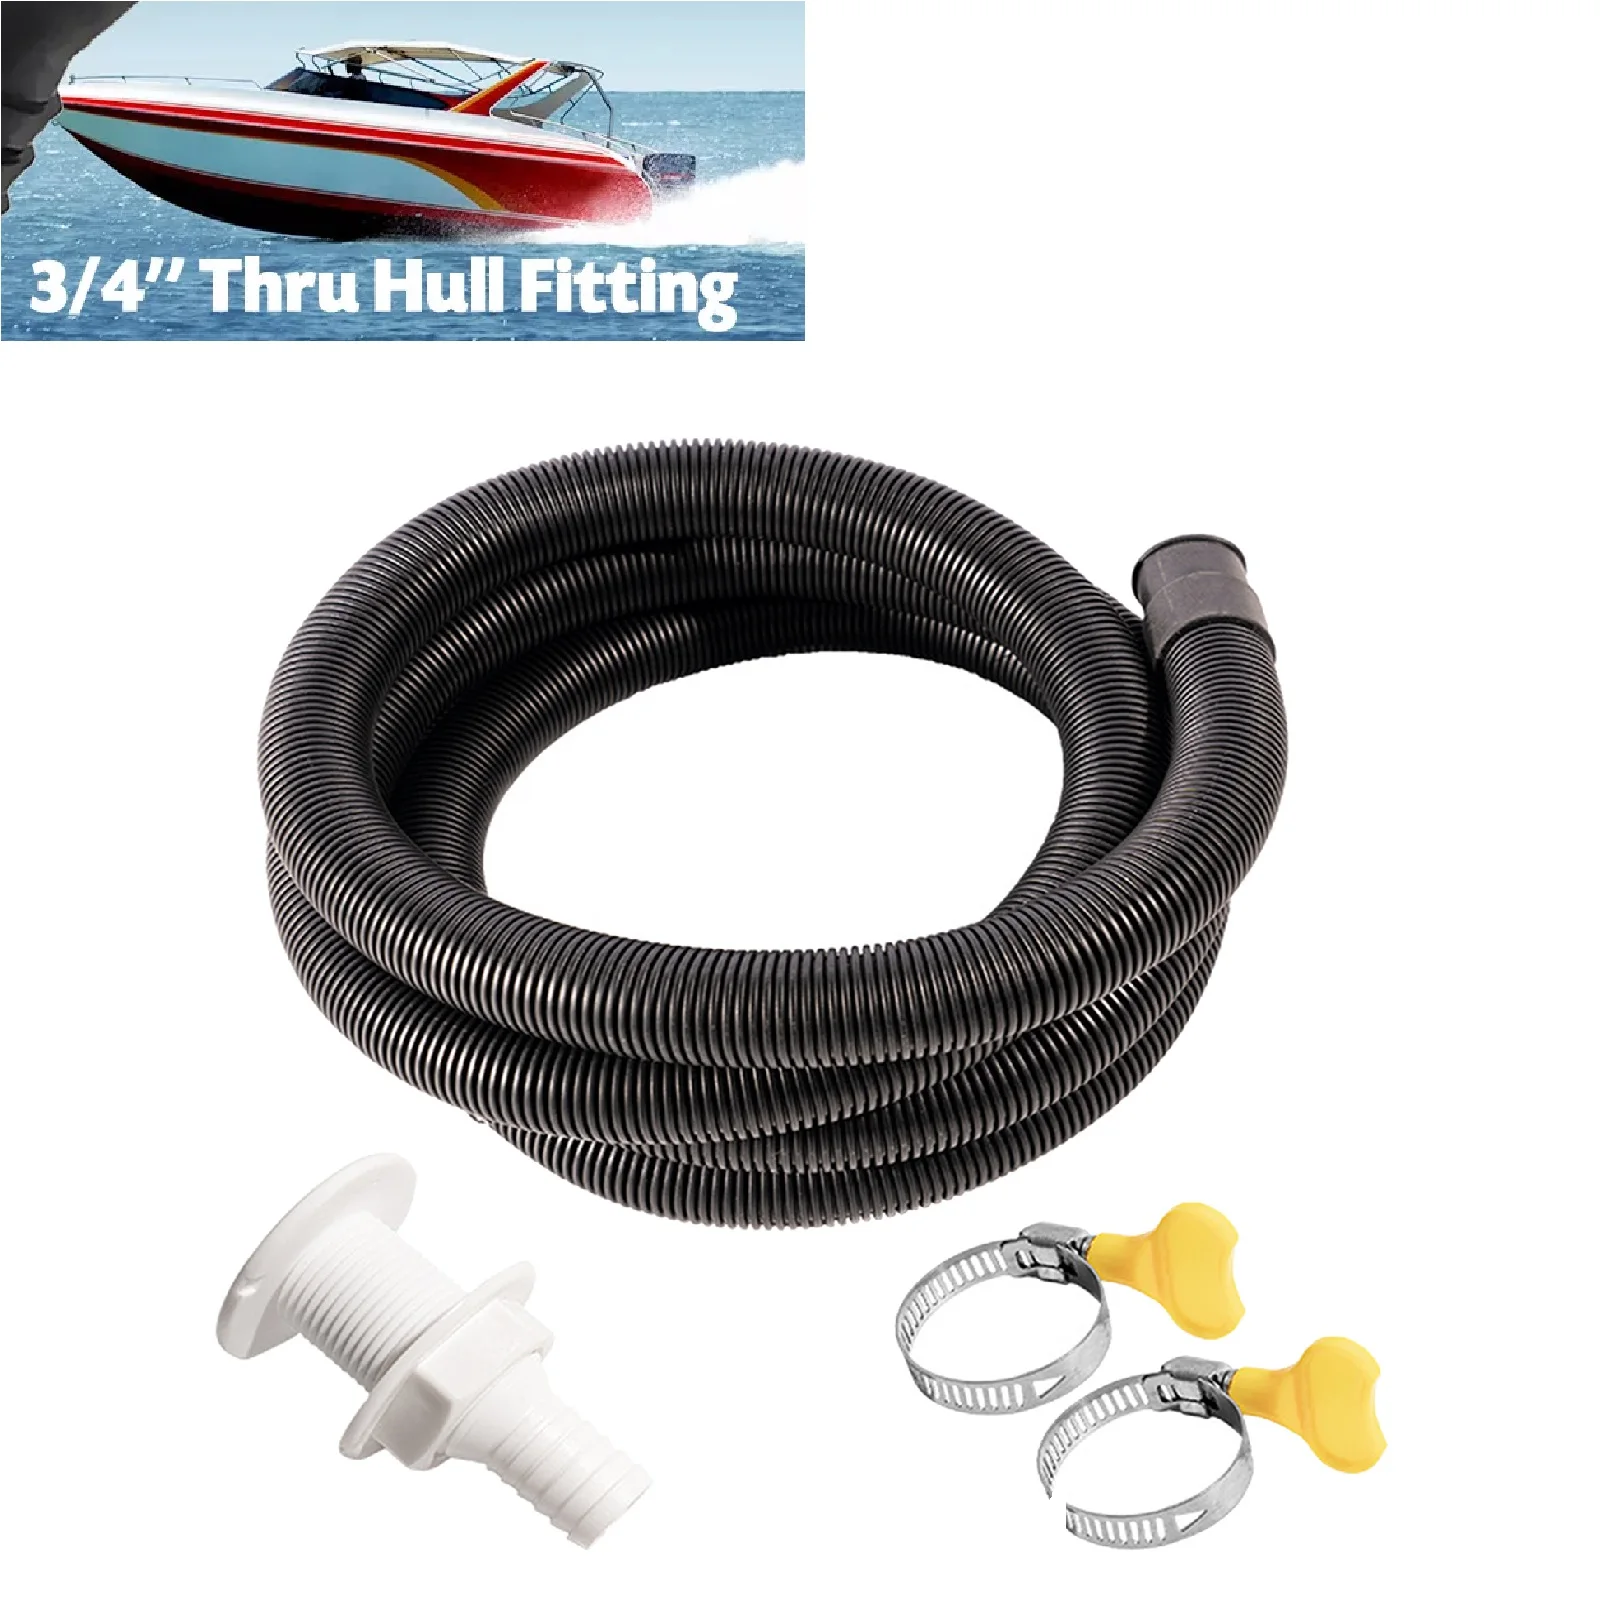 Flexible Bilge Pump Hose Installation Kit 3/4-Inch Diameter 6.6 FT for Boats with 2 Clamps and Thru-Hull Fitting bilge pump installation kit flexible pvc drainage pipe hose heavy duty bilge pump hose with clamps and fitting for rv